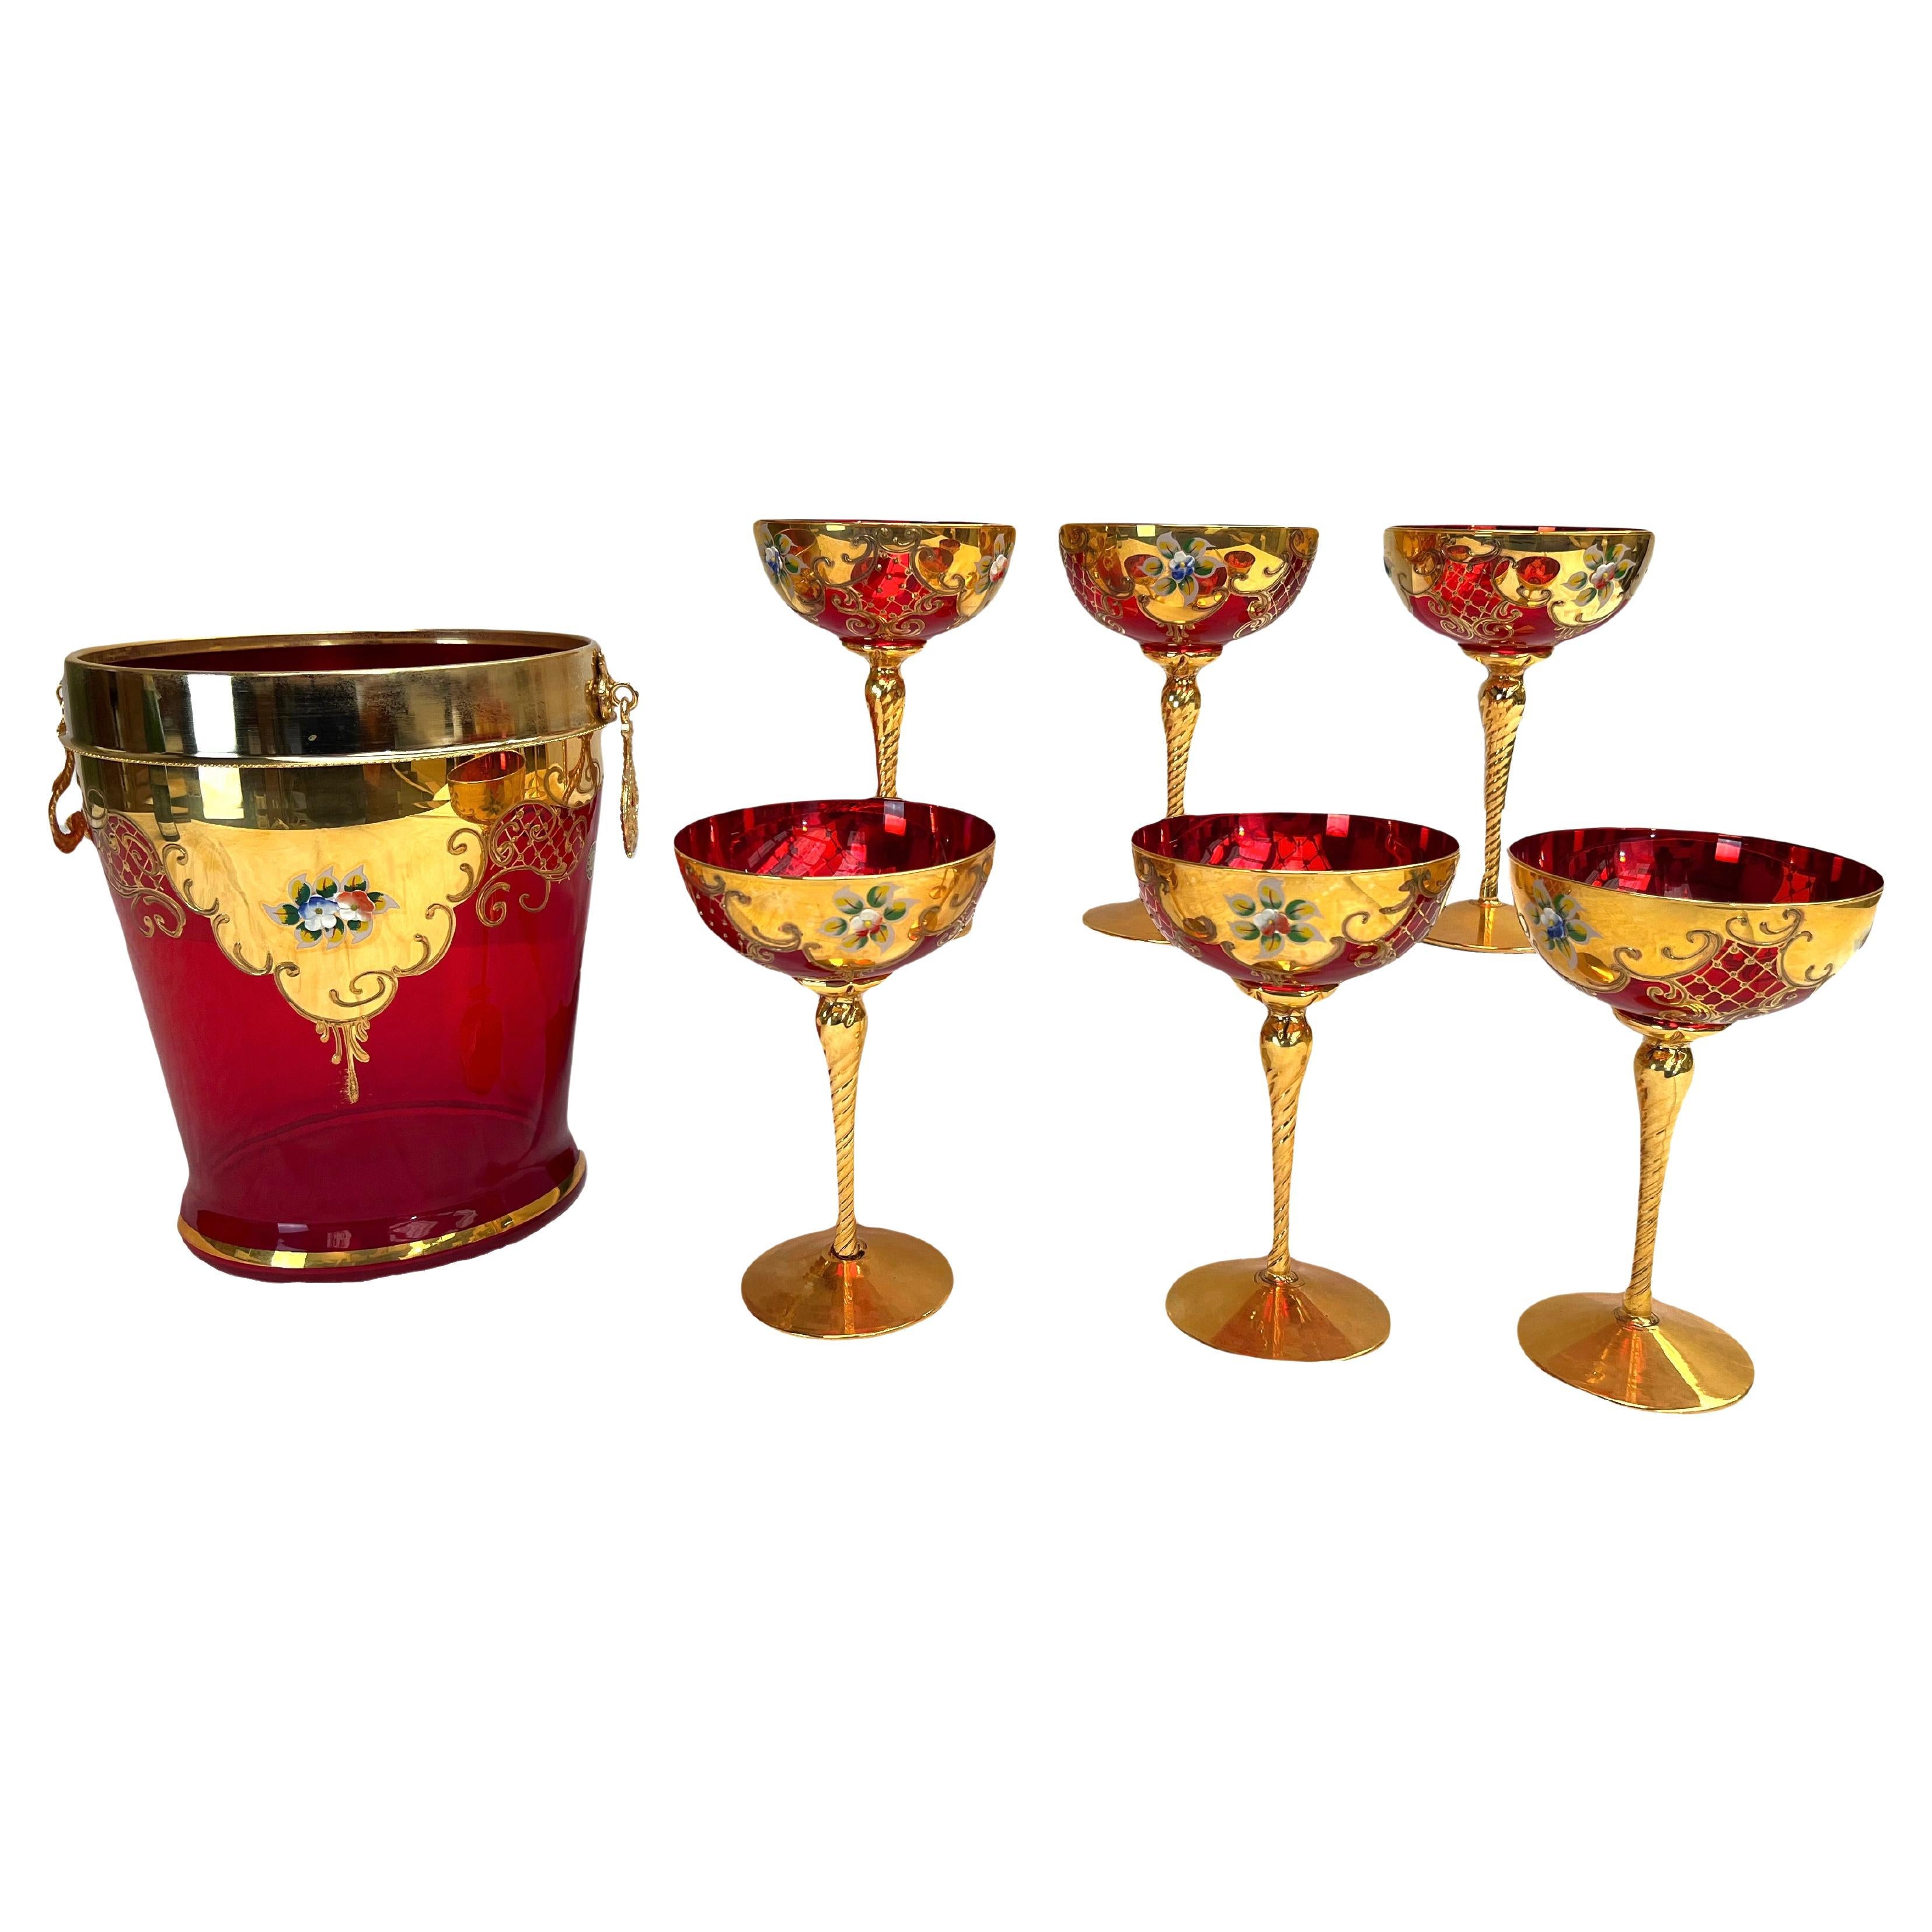 Murano Champagne Cups with Champagne Bucket in Murano Glass, 1960s, Set of 7